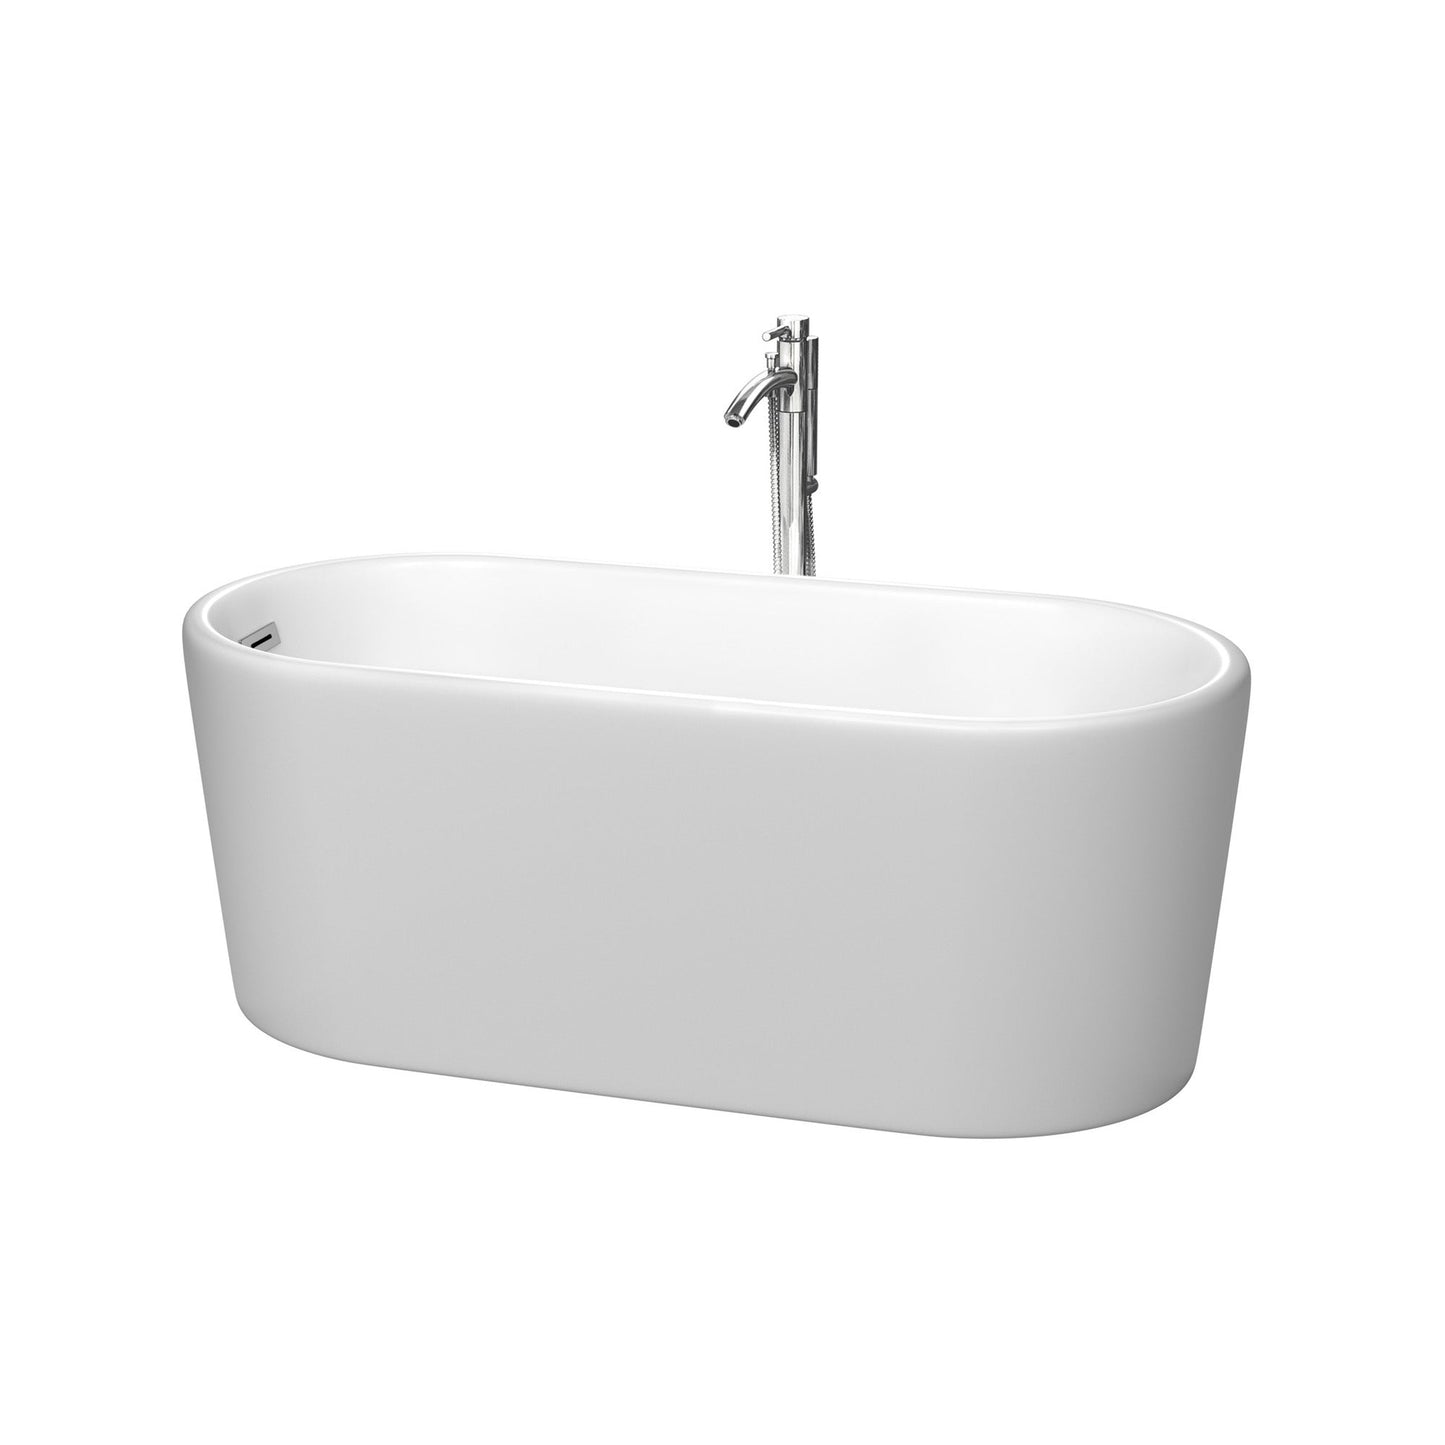 Wyndham Collection Ursula 59" Freestanding Bathtub in Matte White With Floor Mounted Faucet, Drain and Overflow Trim in Polished Chrome